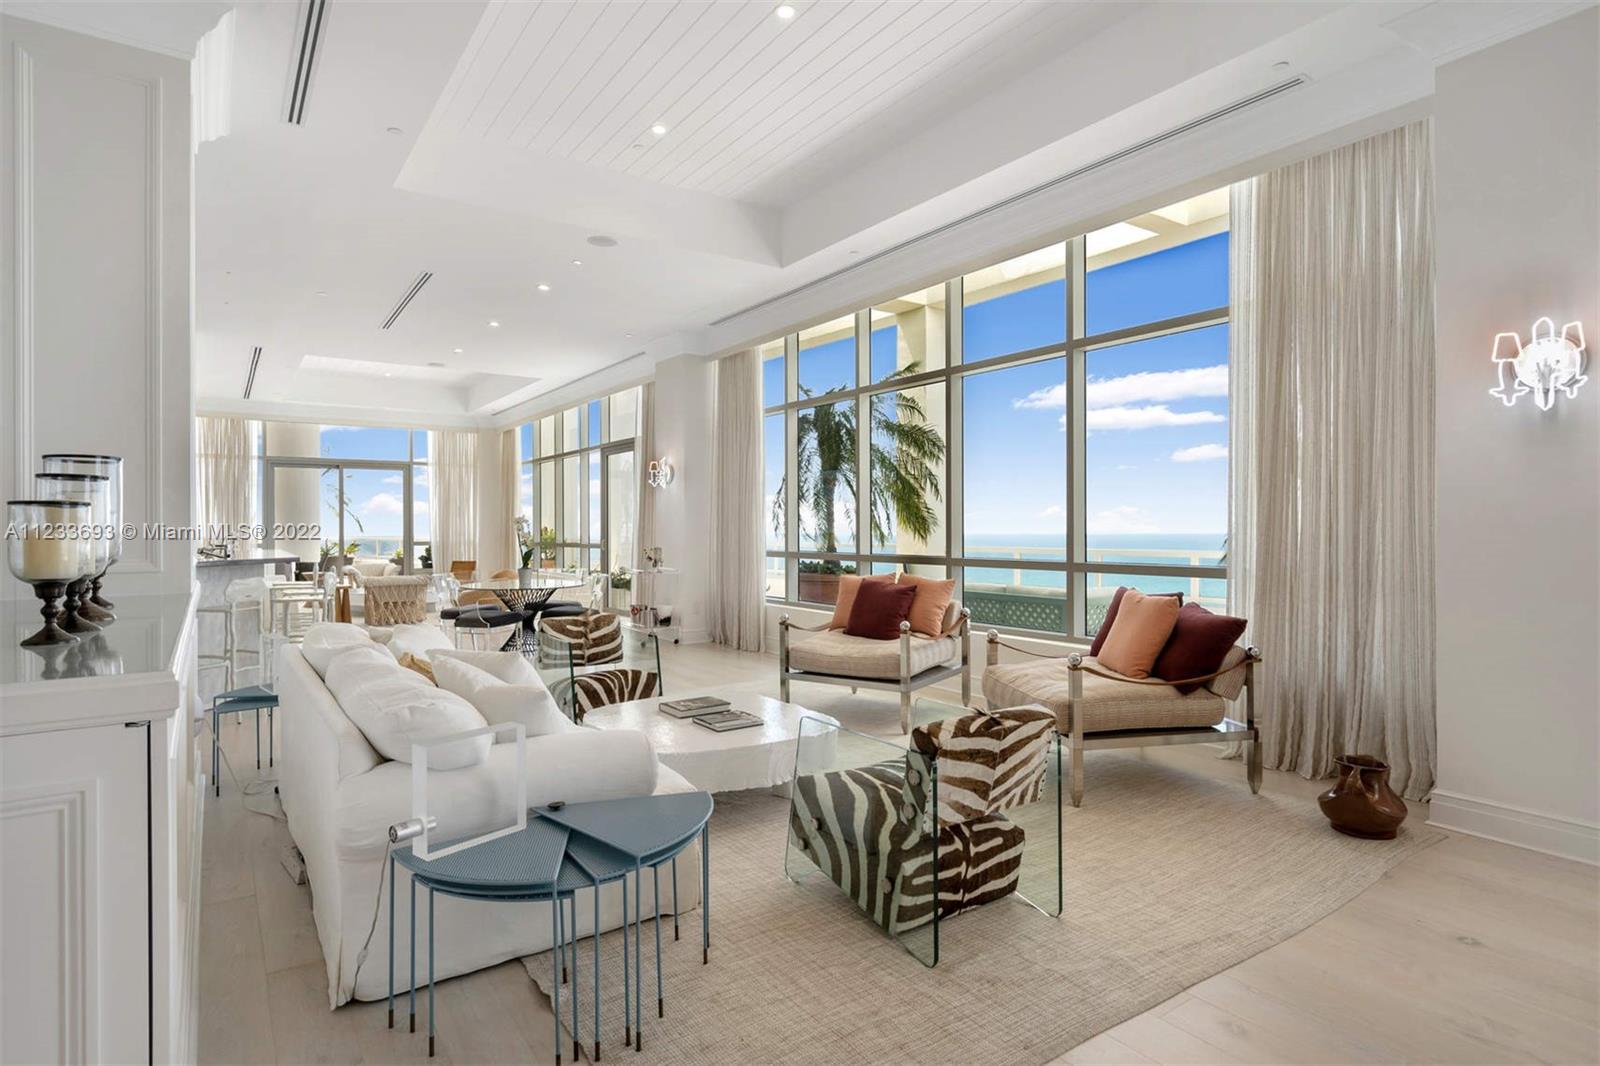 Listing Image 4401 Collins Ave #PH - South